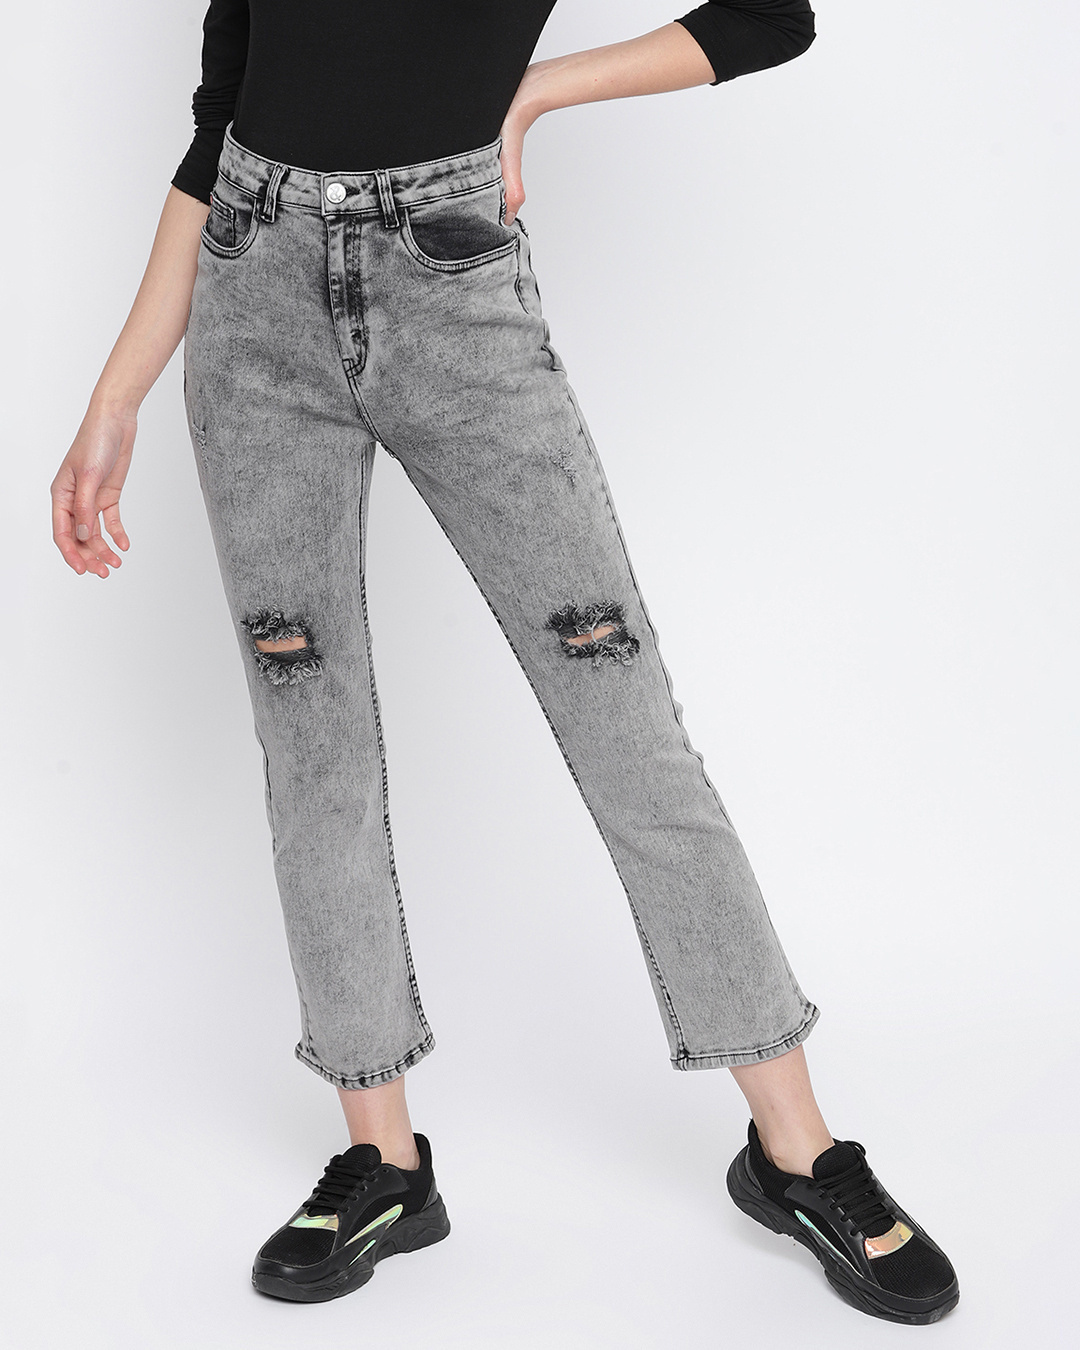 Buy Women's Grey Ripped Bootcut Jeans for Women Grey Online at Bewakoof